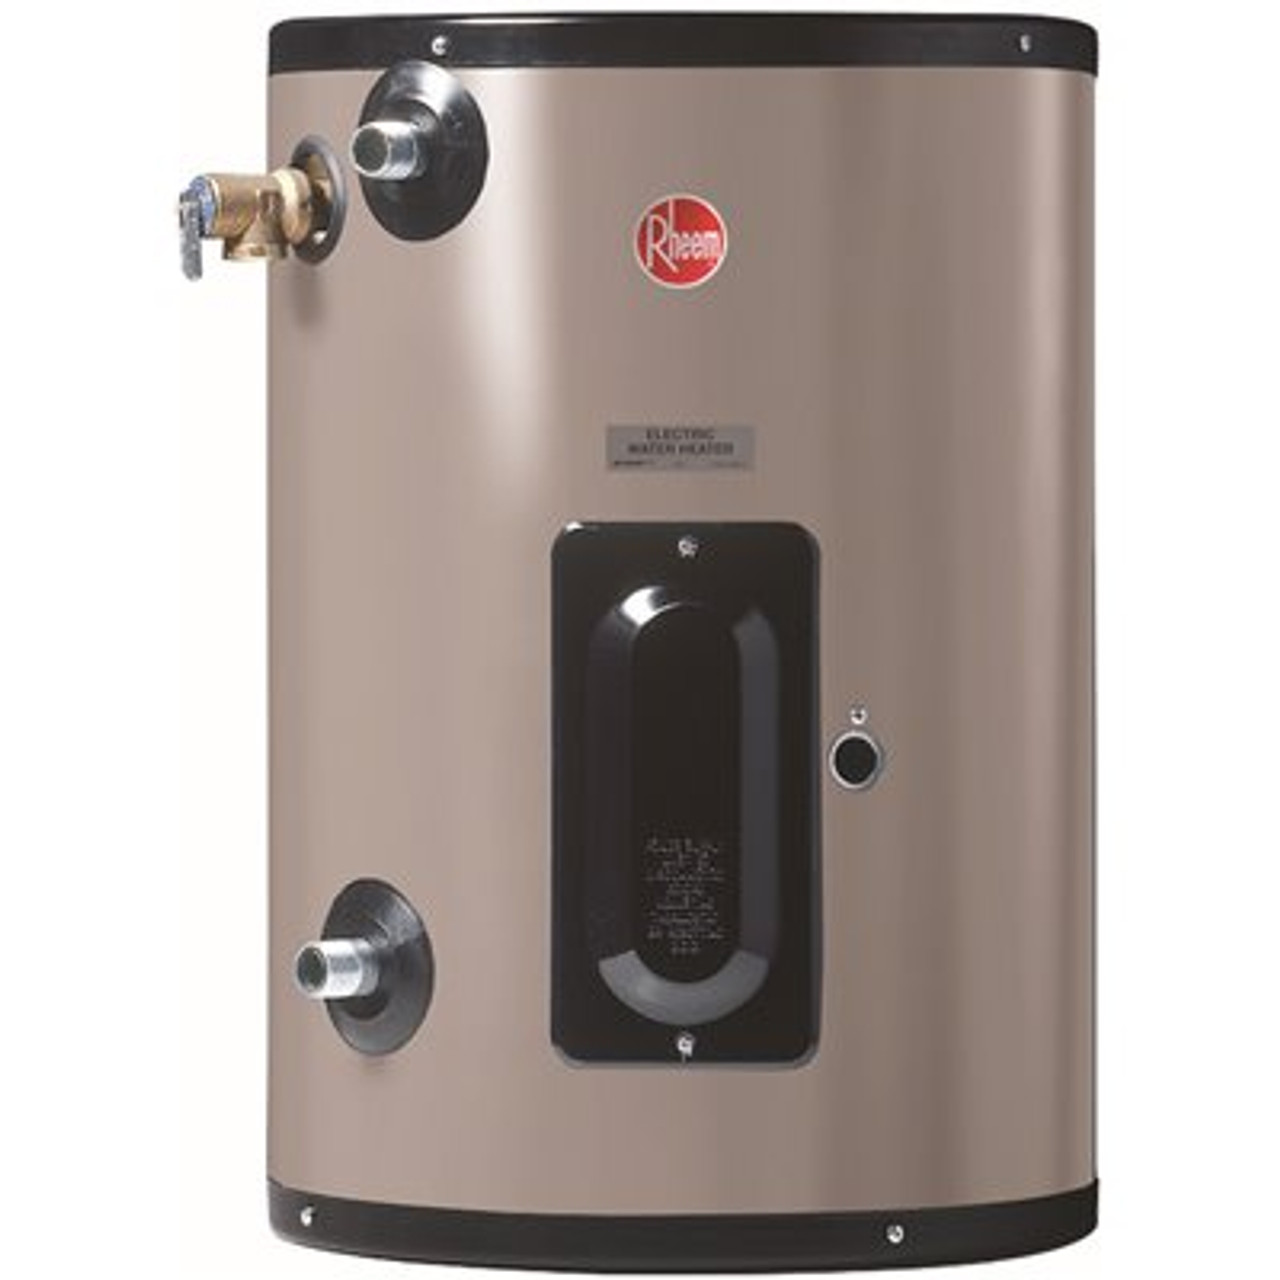 Rheem Commercial Point of Use 20 Gal. 208-Volt 4.5kw 1-Phase Electric Tank Water Heater